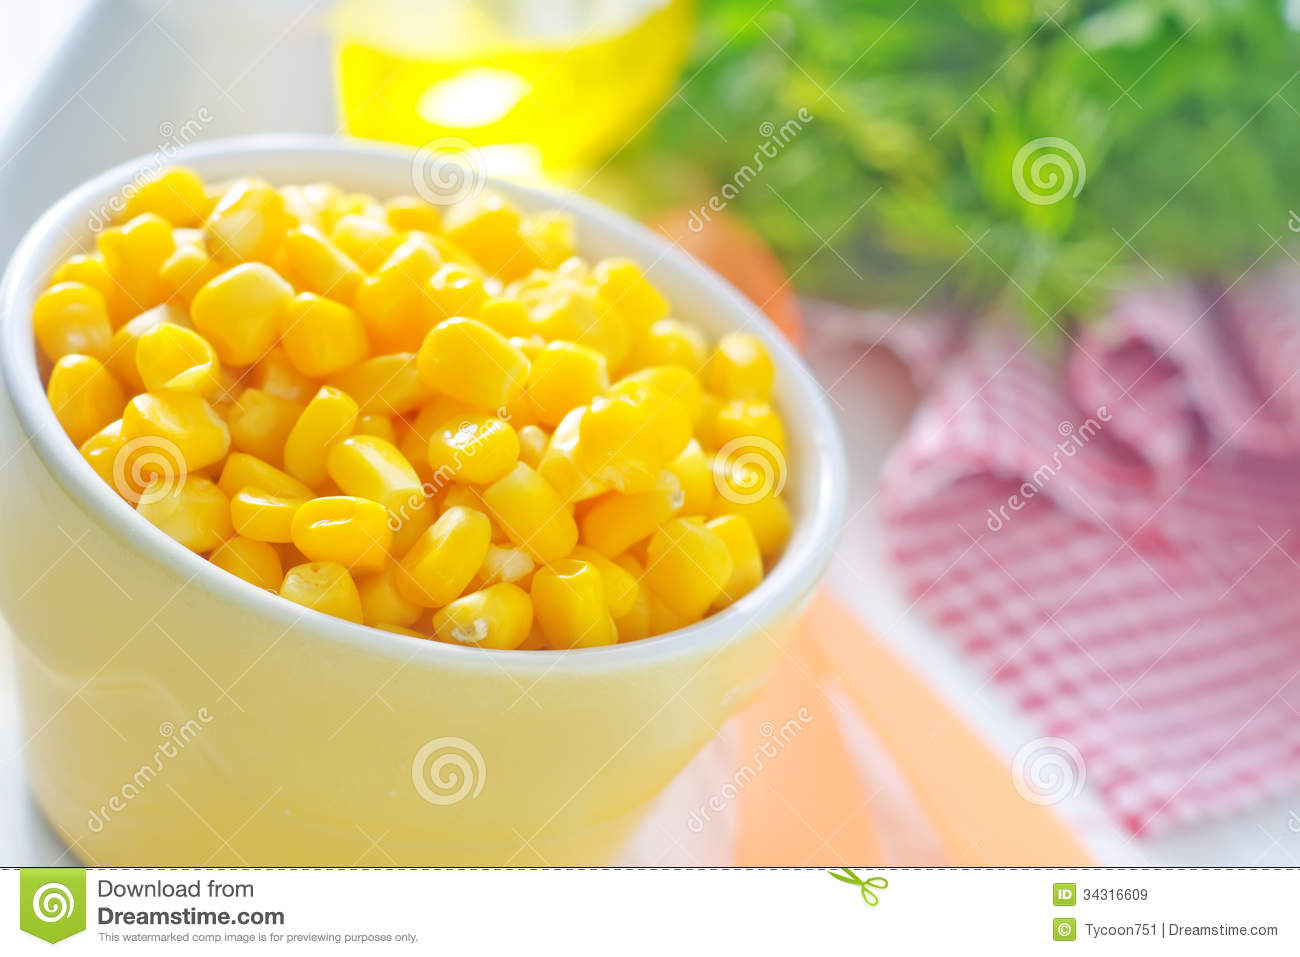 Corn In Bowl Royalty Free Stock Images   Image  34316609